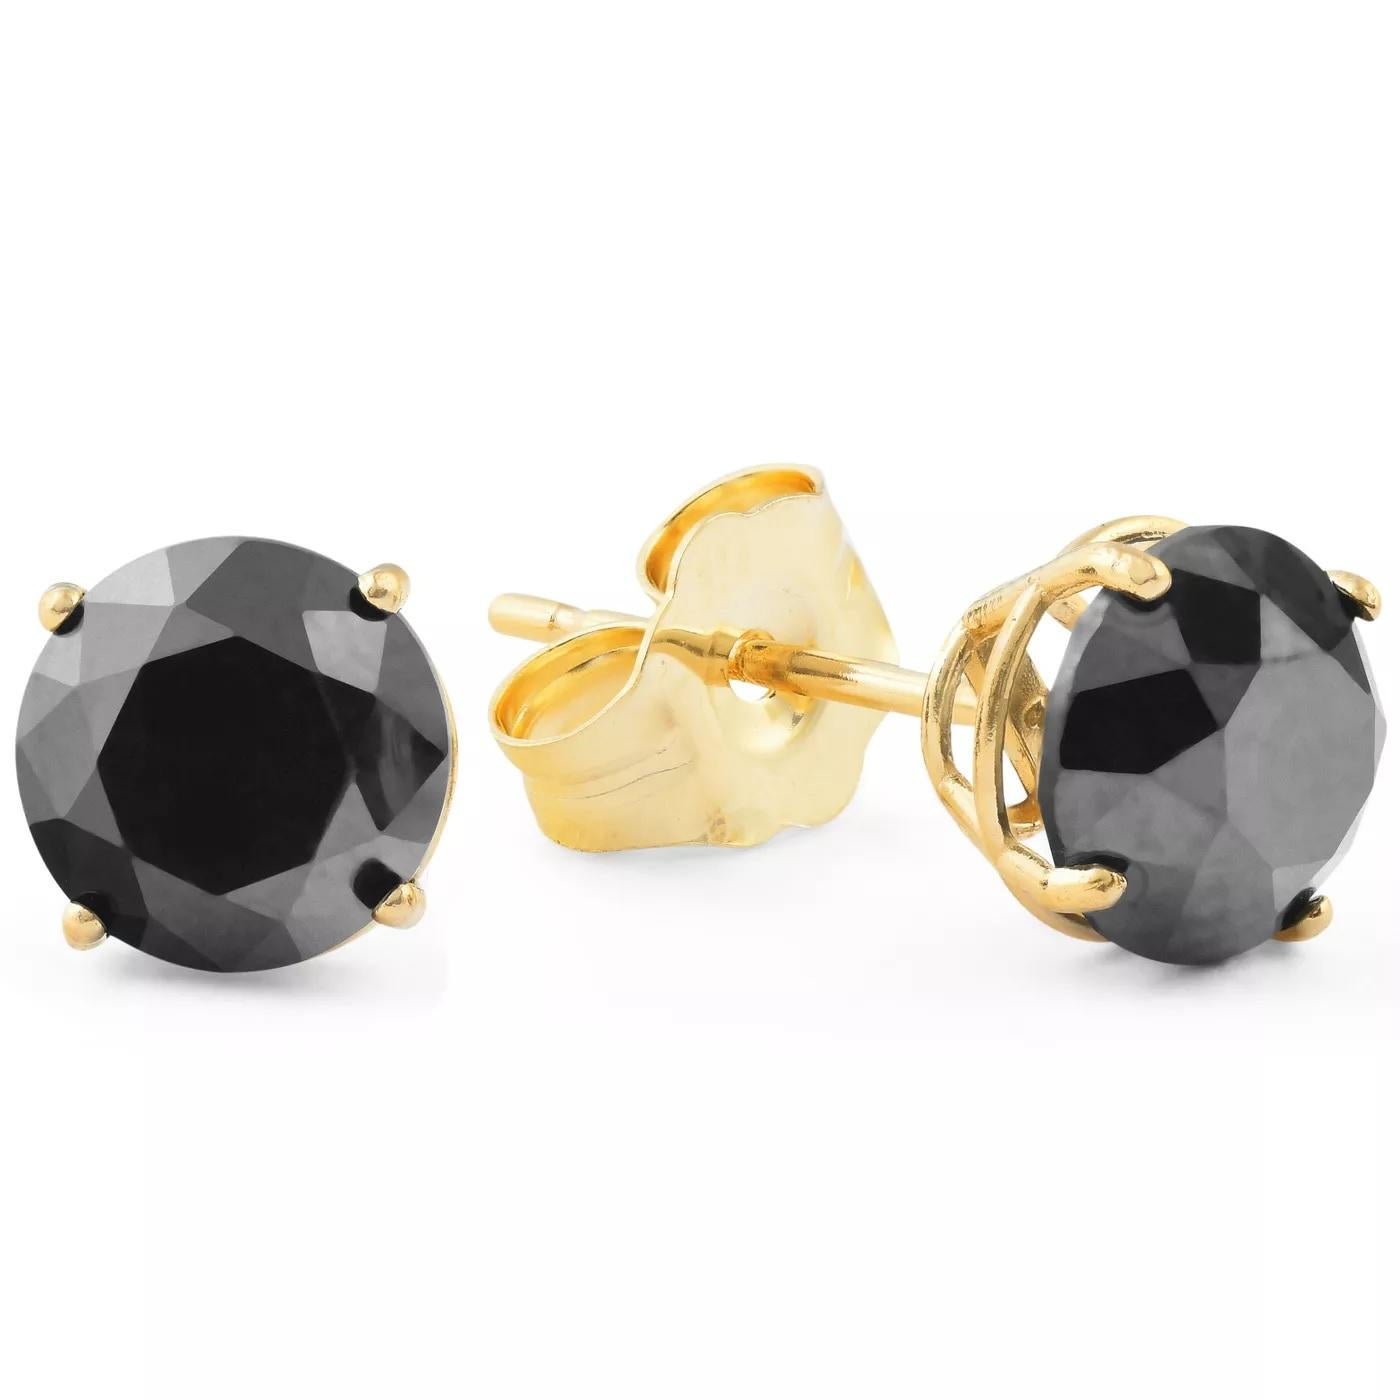 Alluring and refined, these diamond stud earrings are sure to be noticed. Created in 14 K yellow gold, the earring showcases a beguiling 1.6 carat natural black diamond solitaire measuring 6.80 x 6.79 x 5.23mm. Exquisitely made and Captivating with